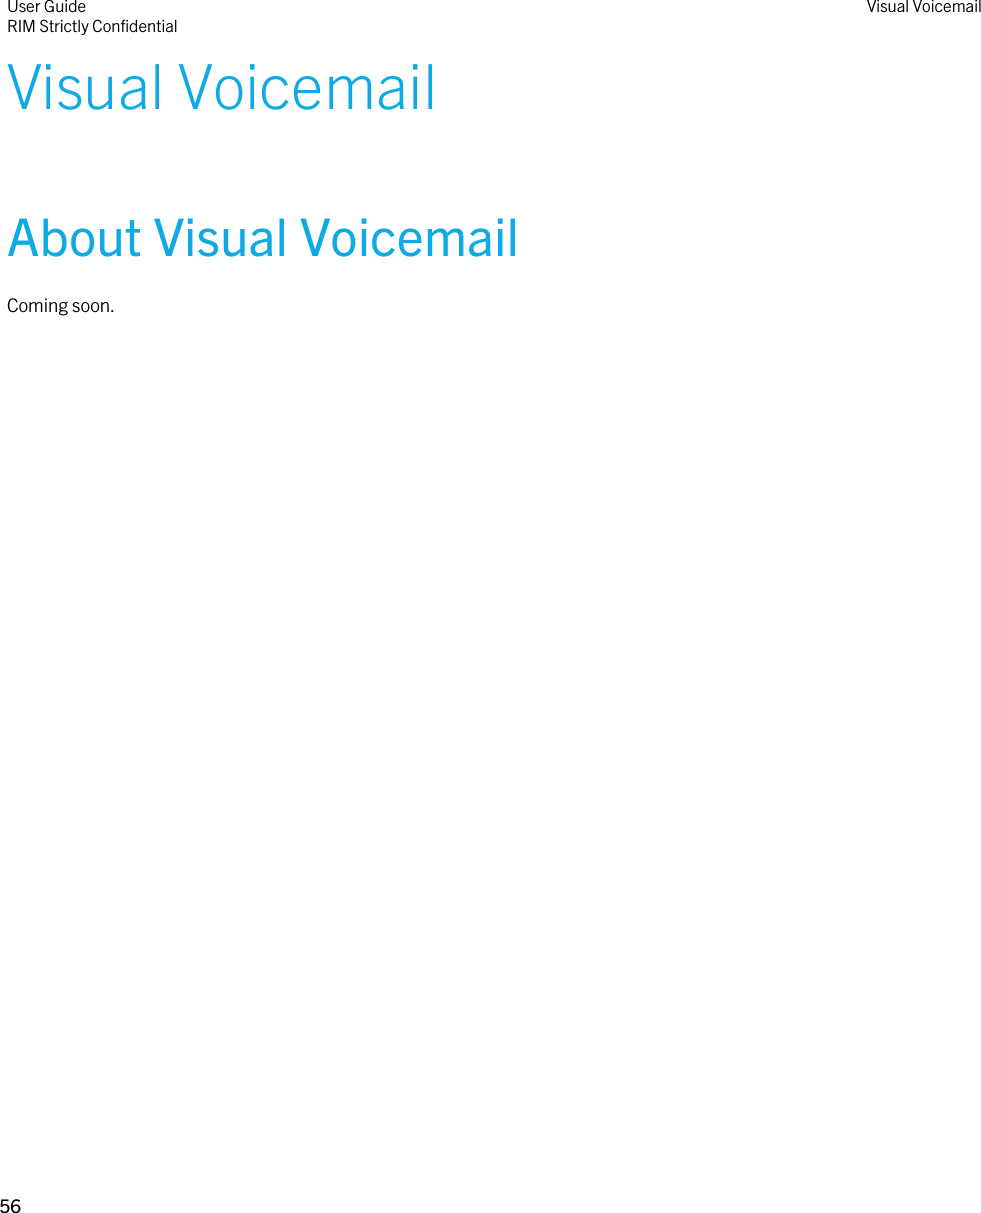 Visual VoicemailAbout Visual VoicemailComing soon.User GuideRIM Strictly ConfidentialVisual Voicemail56 